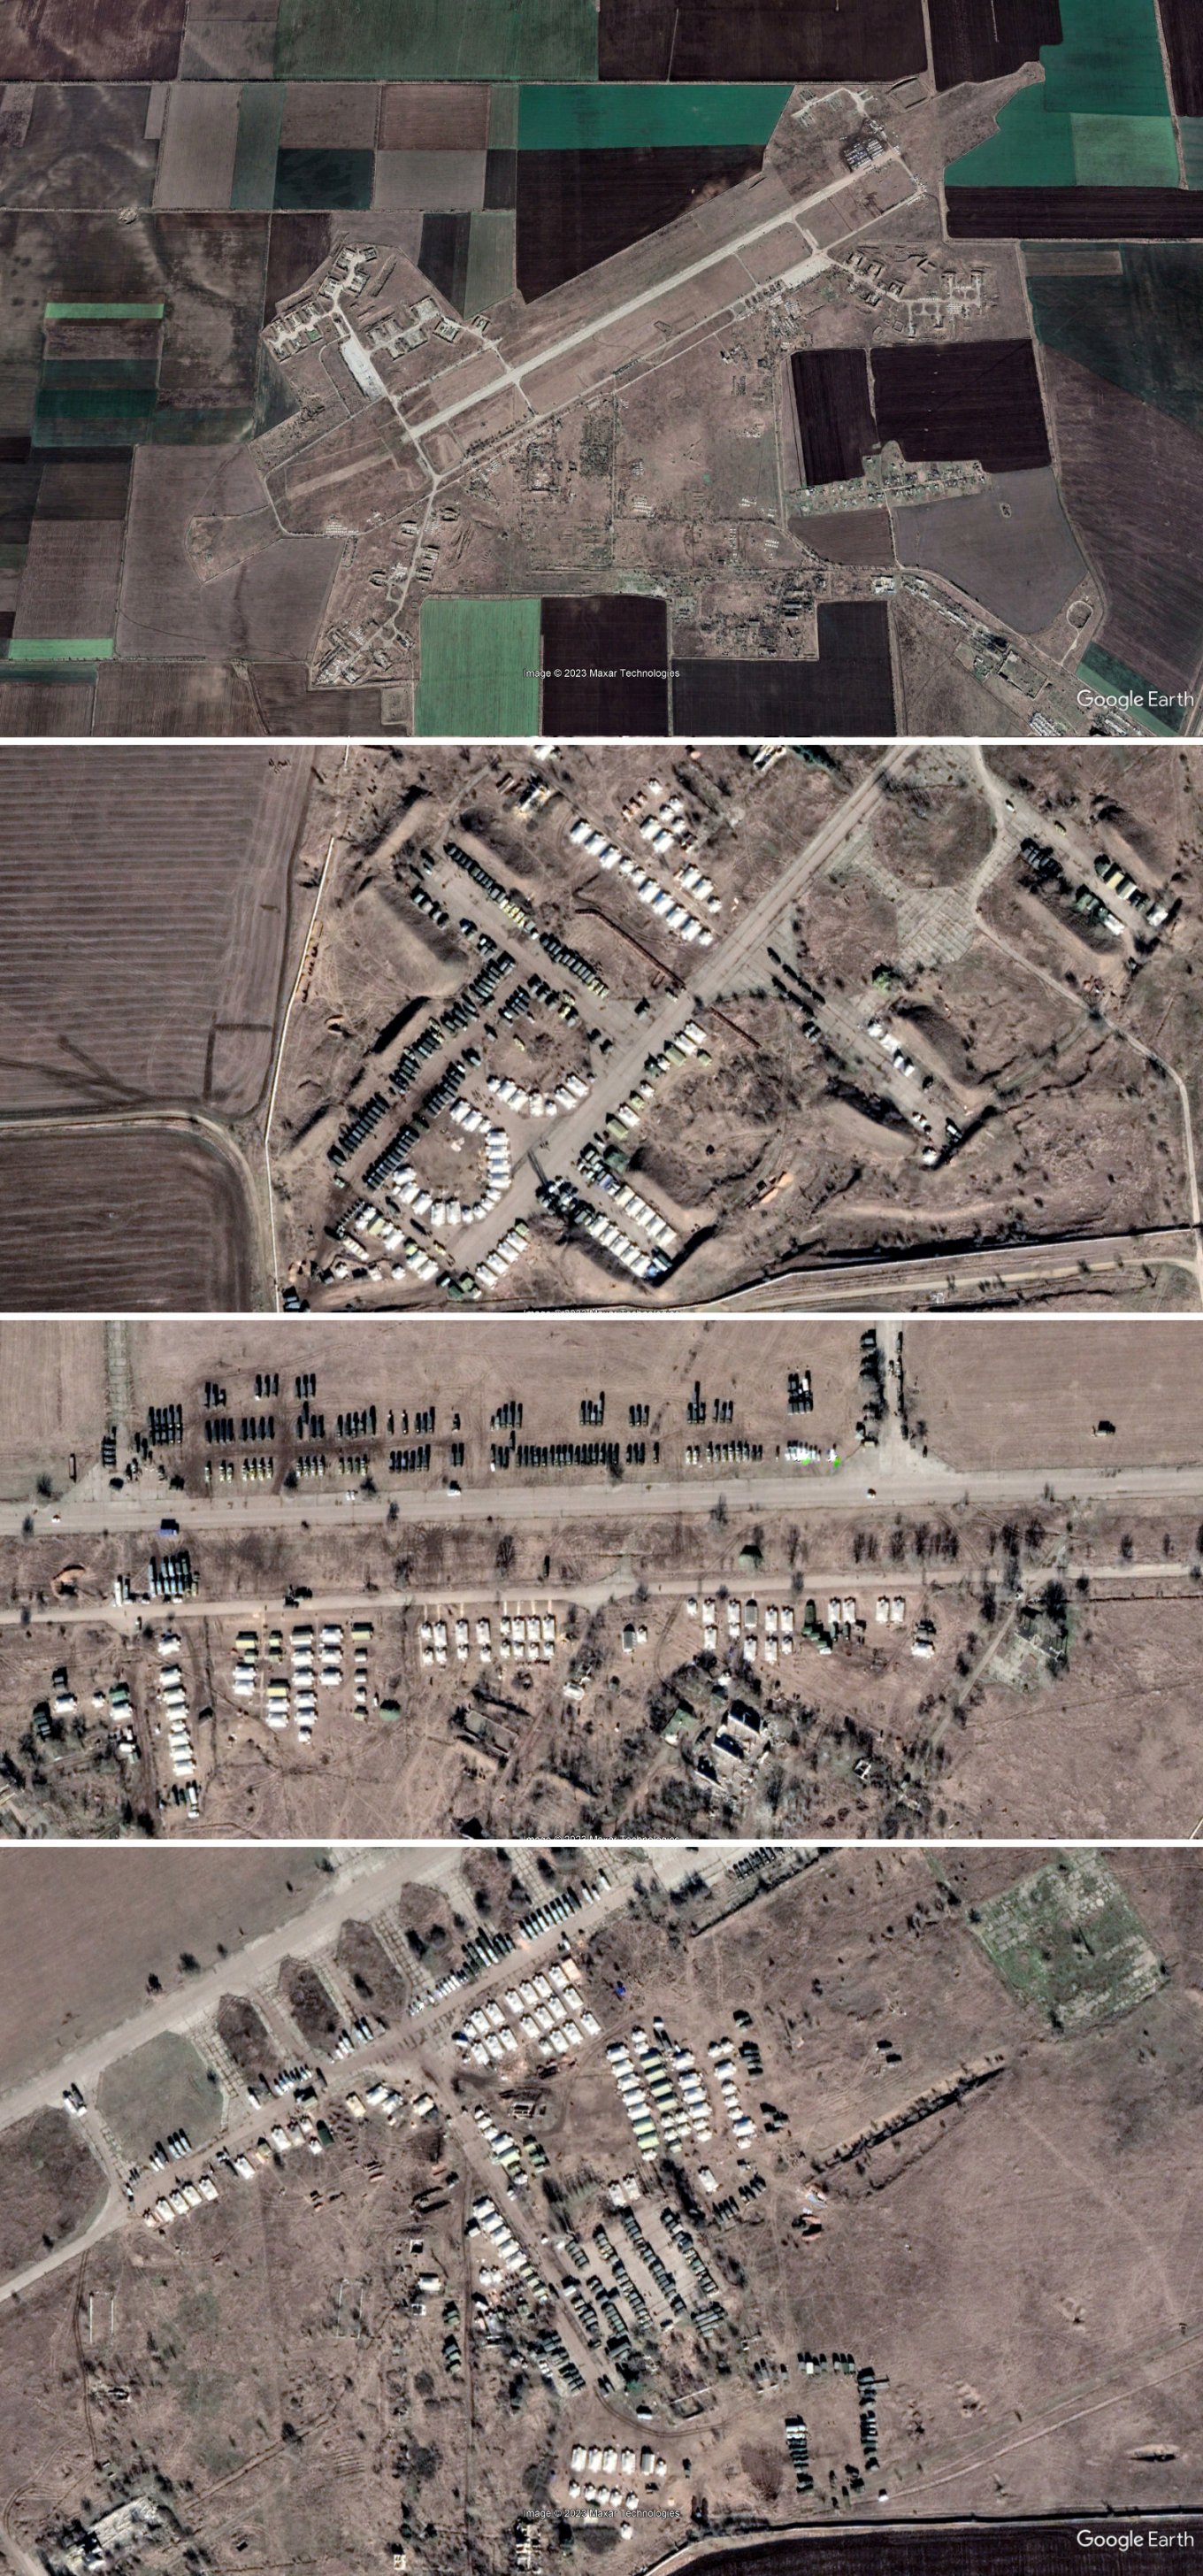 Oktiabrsky airfield, now russian military camp. Satellite photos from February 2022